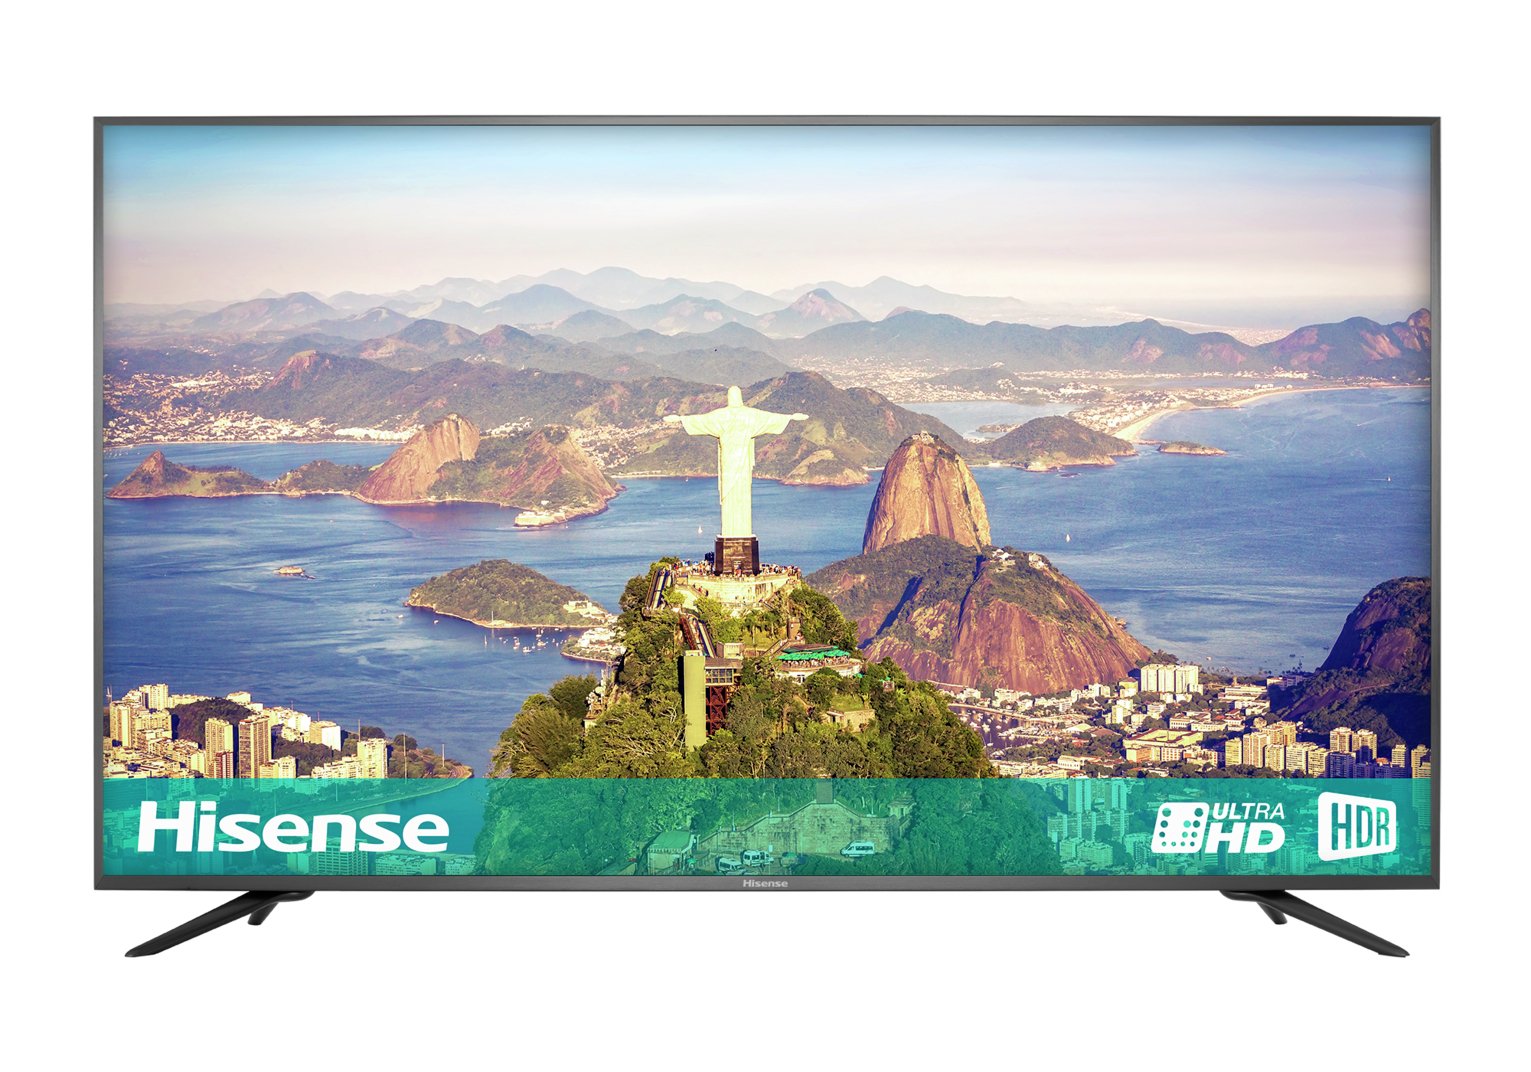 Hisense 75 Inch H75A6600UK Smart 4K UHD TV with HDR